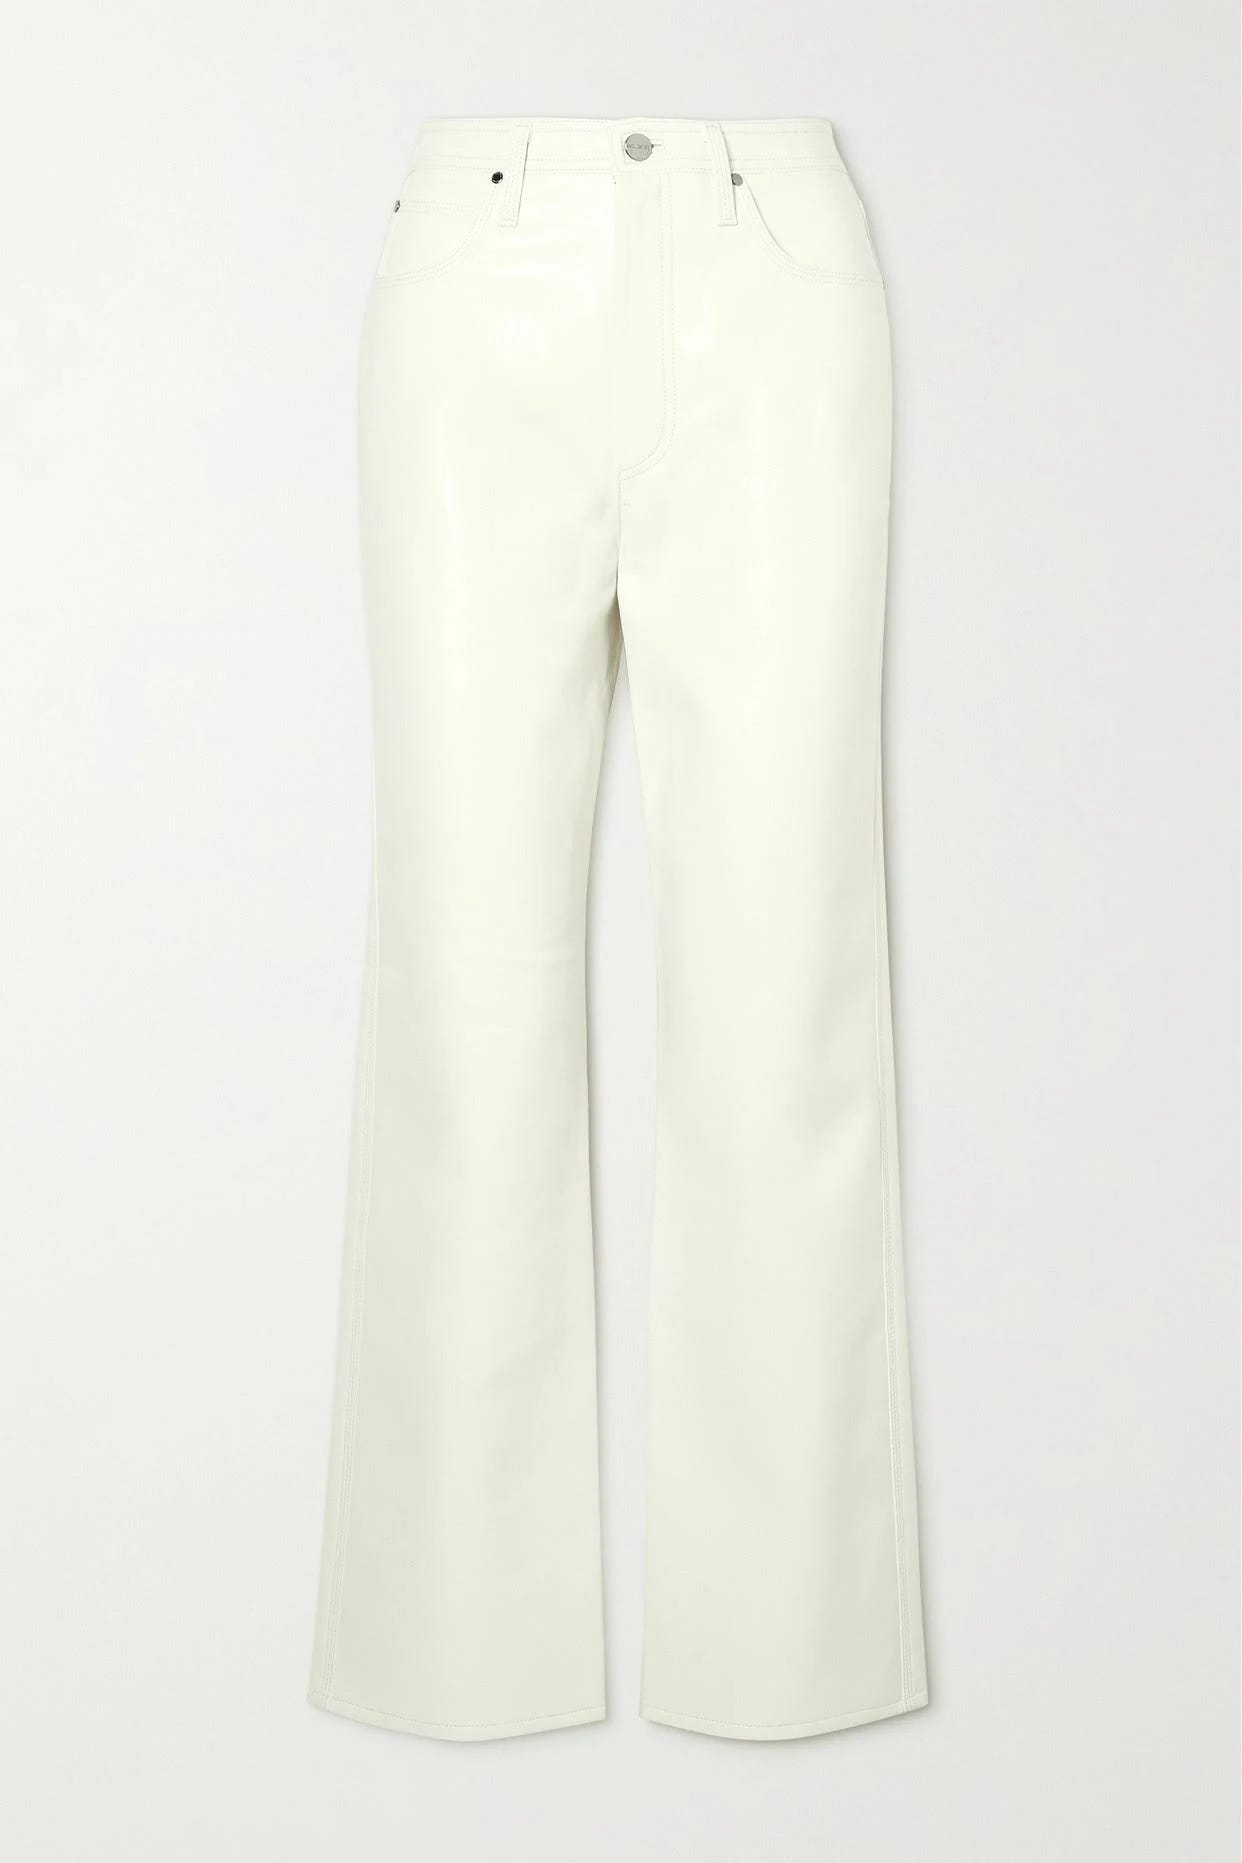 '90s Inspired Recycled Leather Pants - White | Image